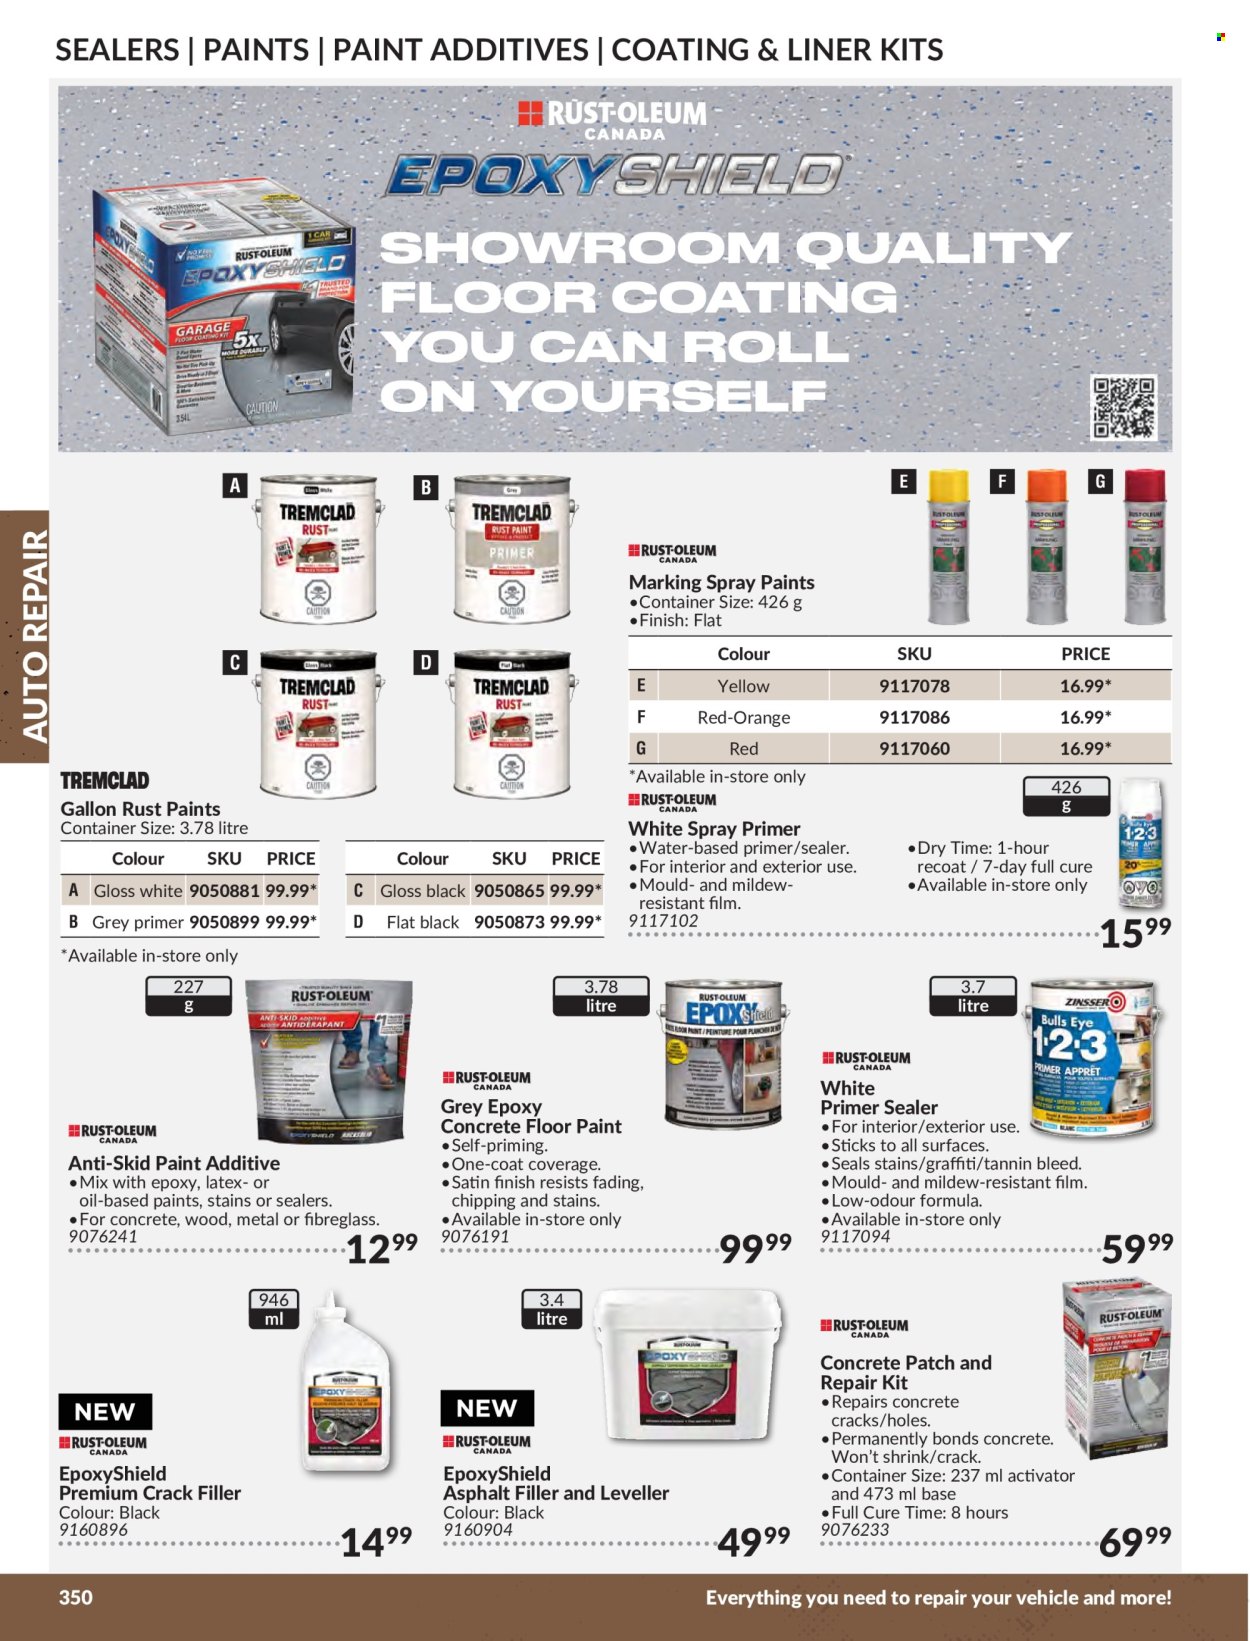 thumbnail - Princess Auto Flyer - Sales products - paint, container. Page 354.